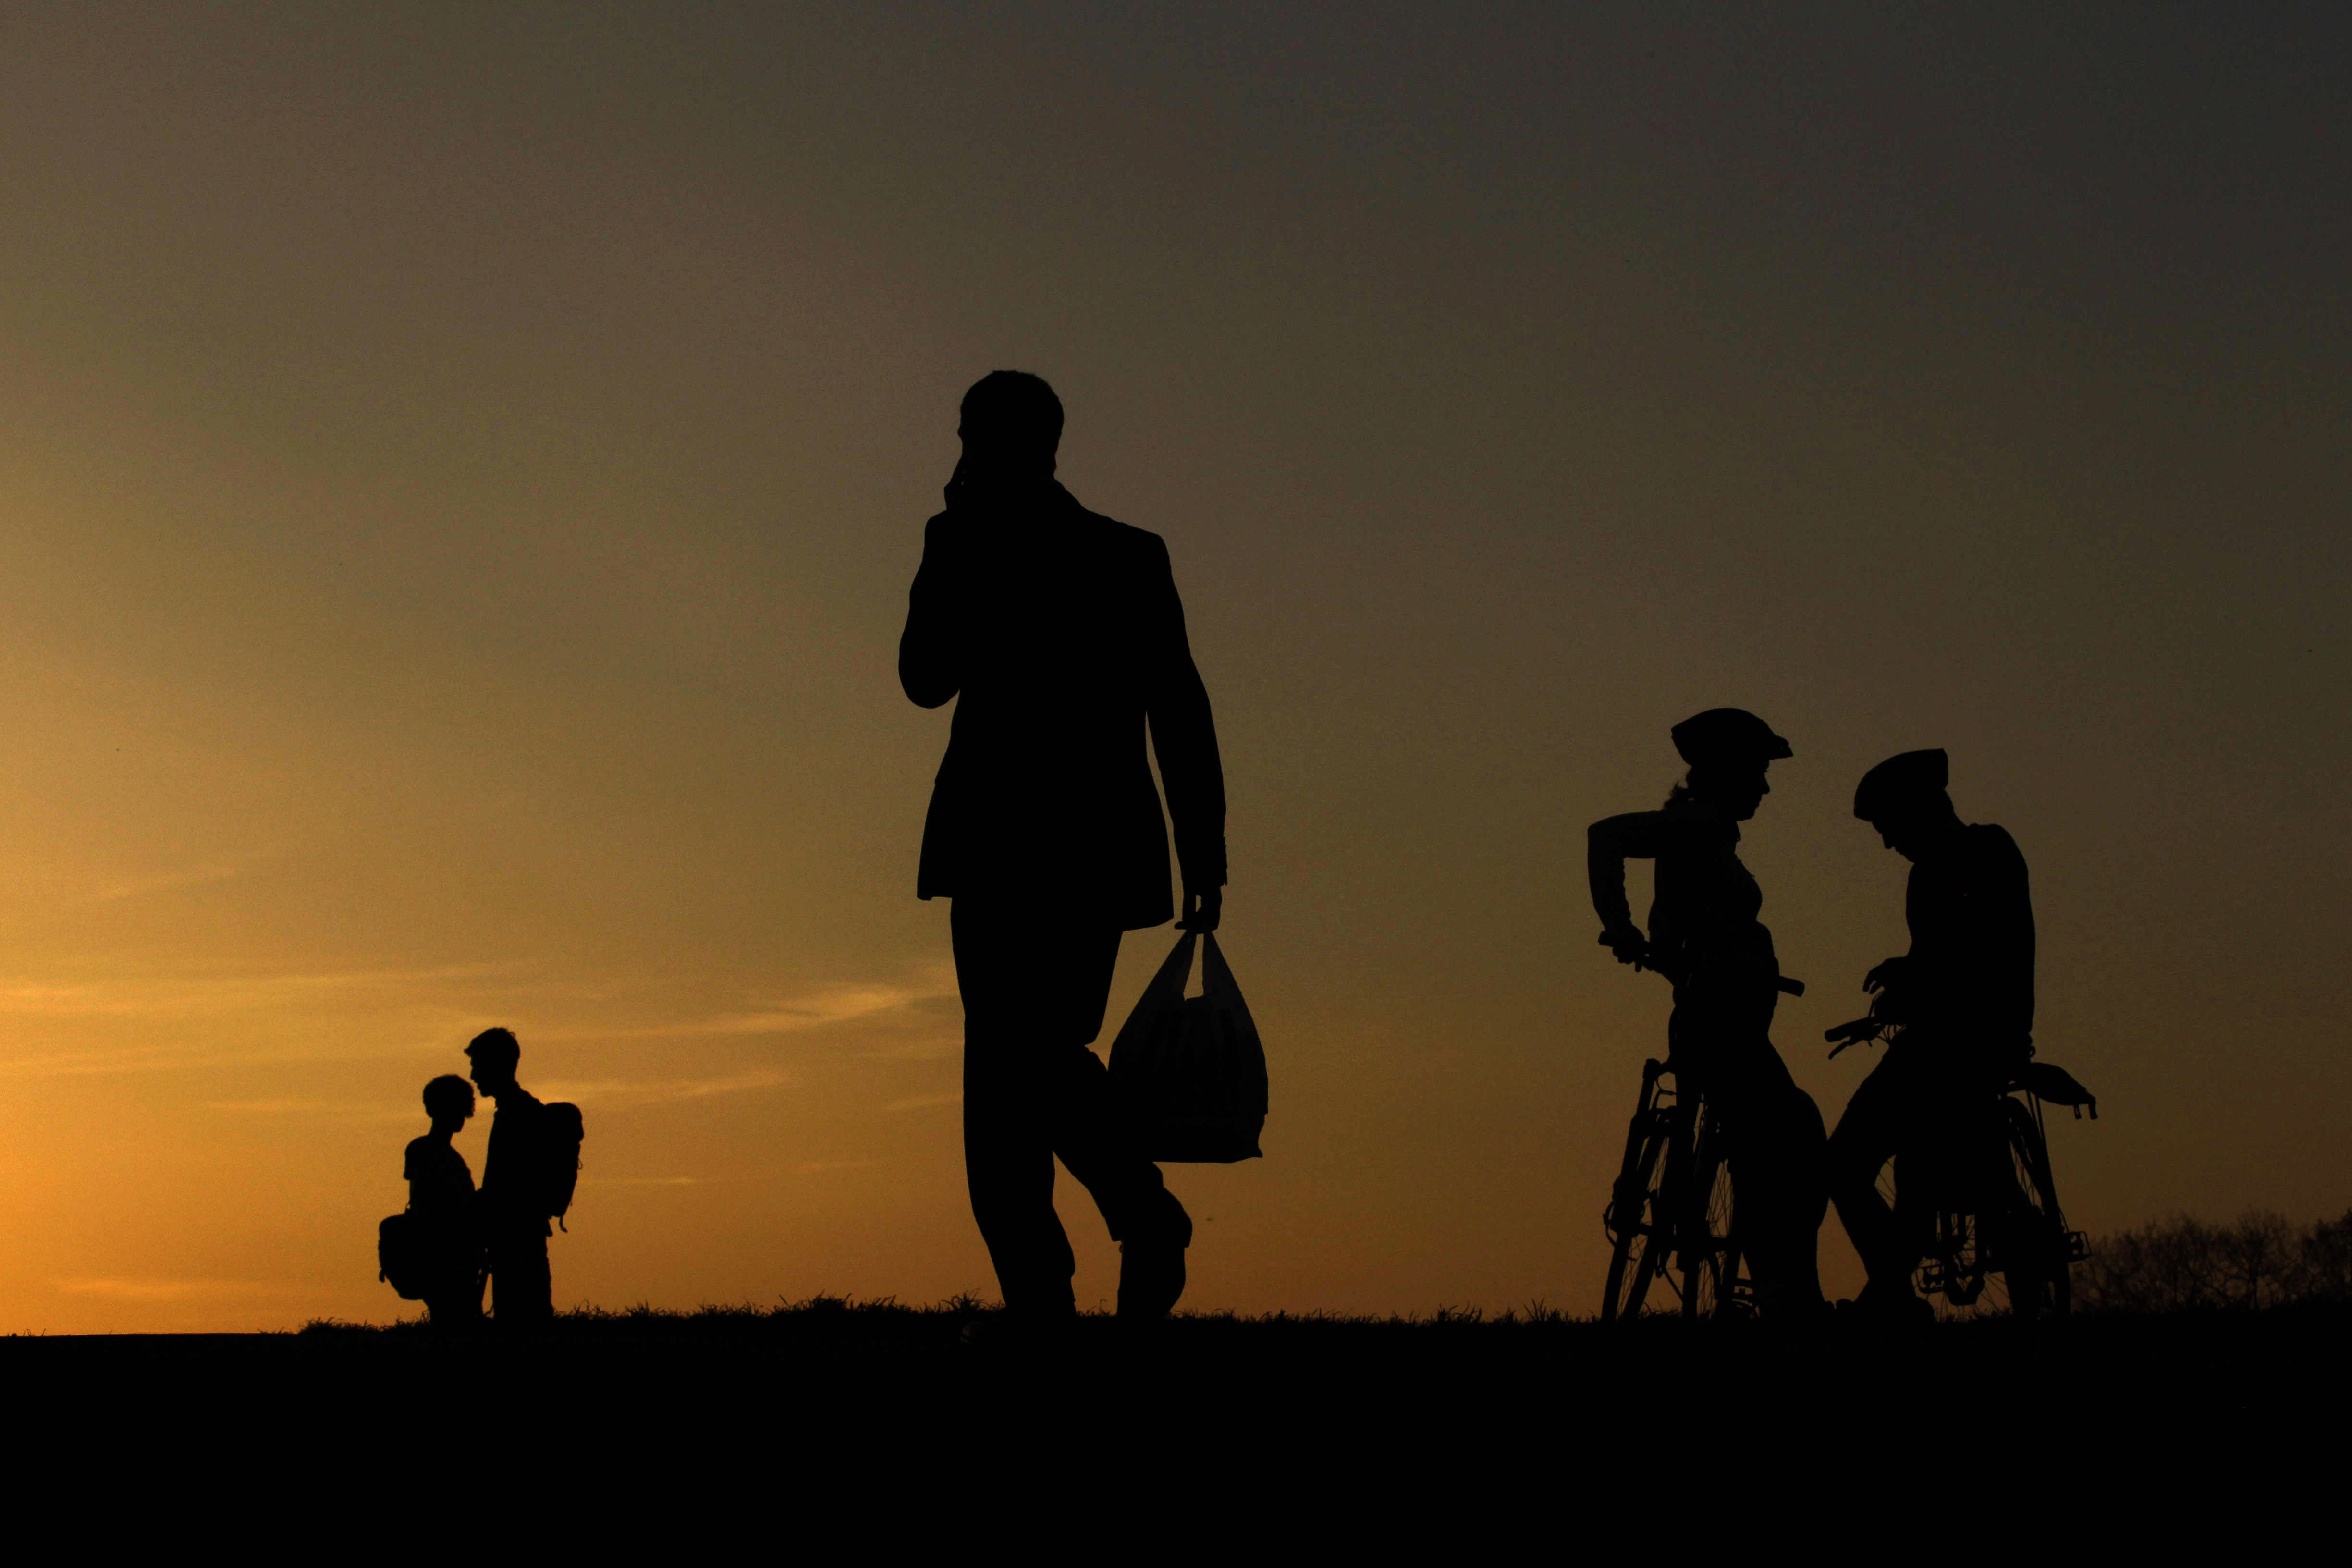 People are silhouetted against the sky from the setting sun on Parliament Hill in Hampstead Heath, London, Friday, April 8, 2011. (AP Photo/Matt Dunham)